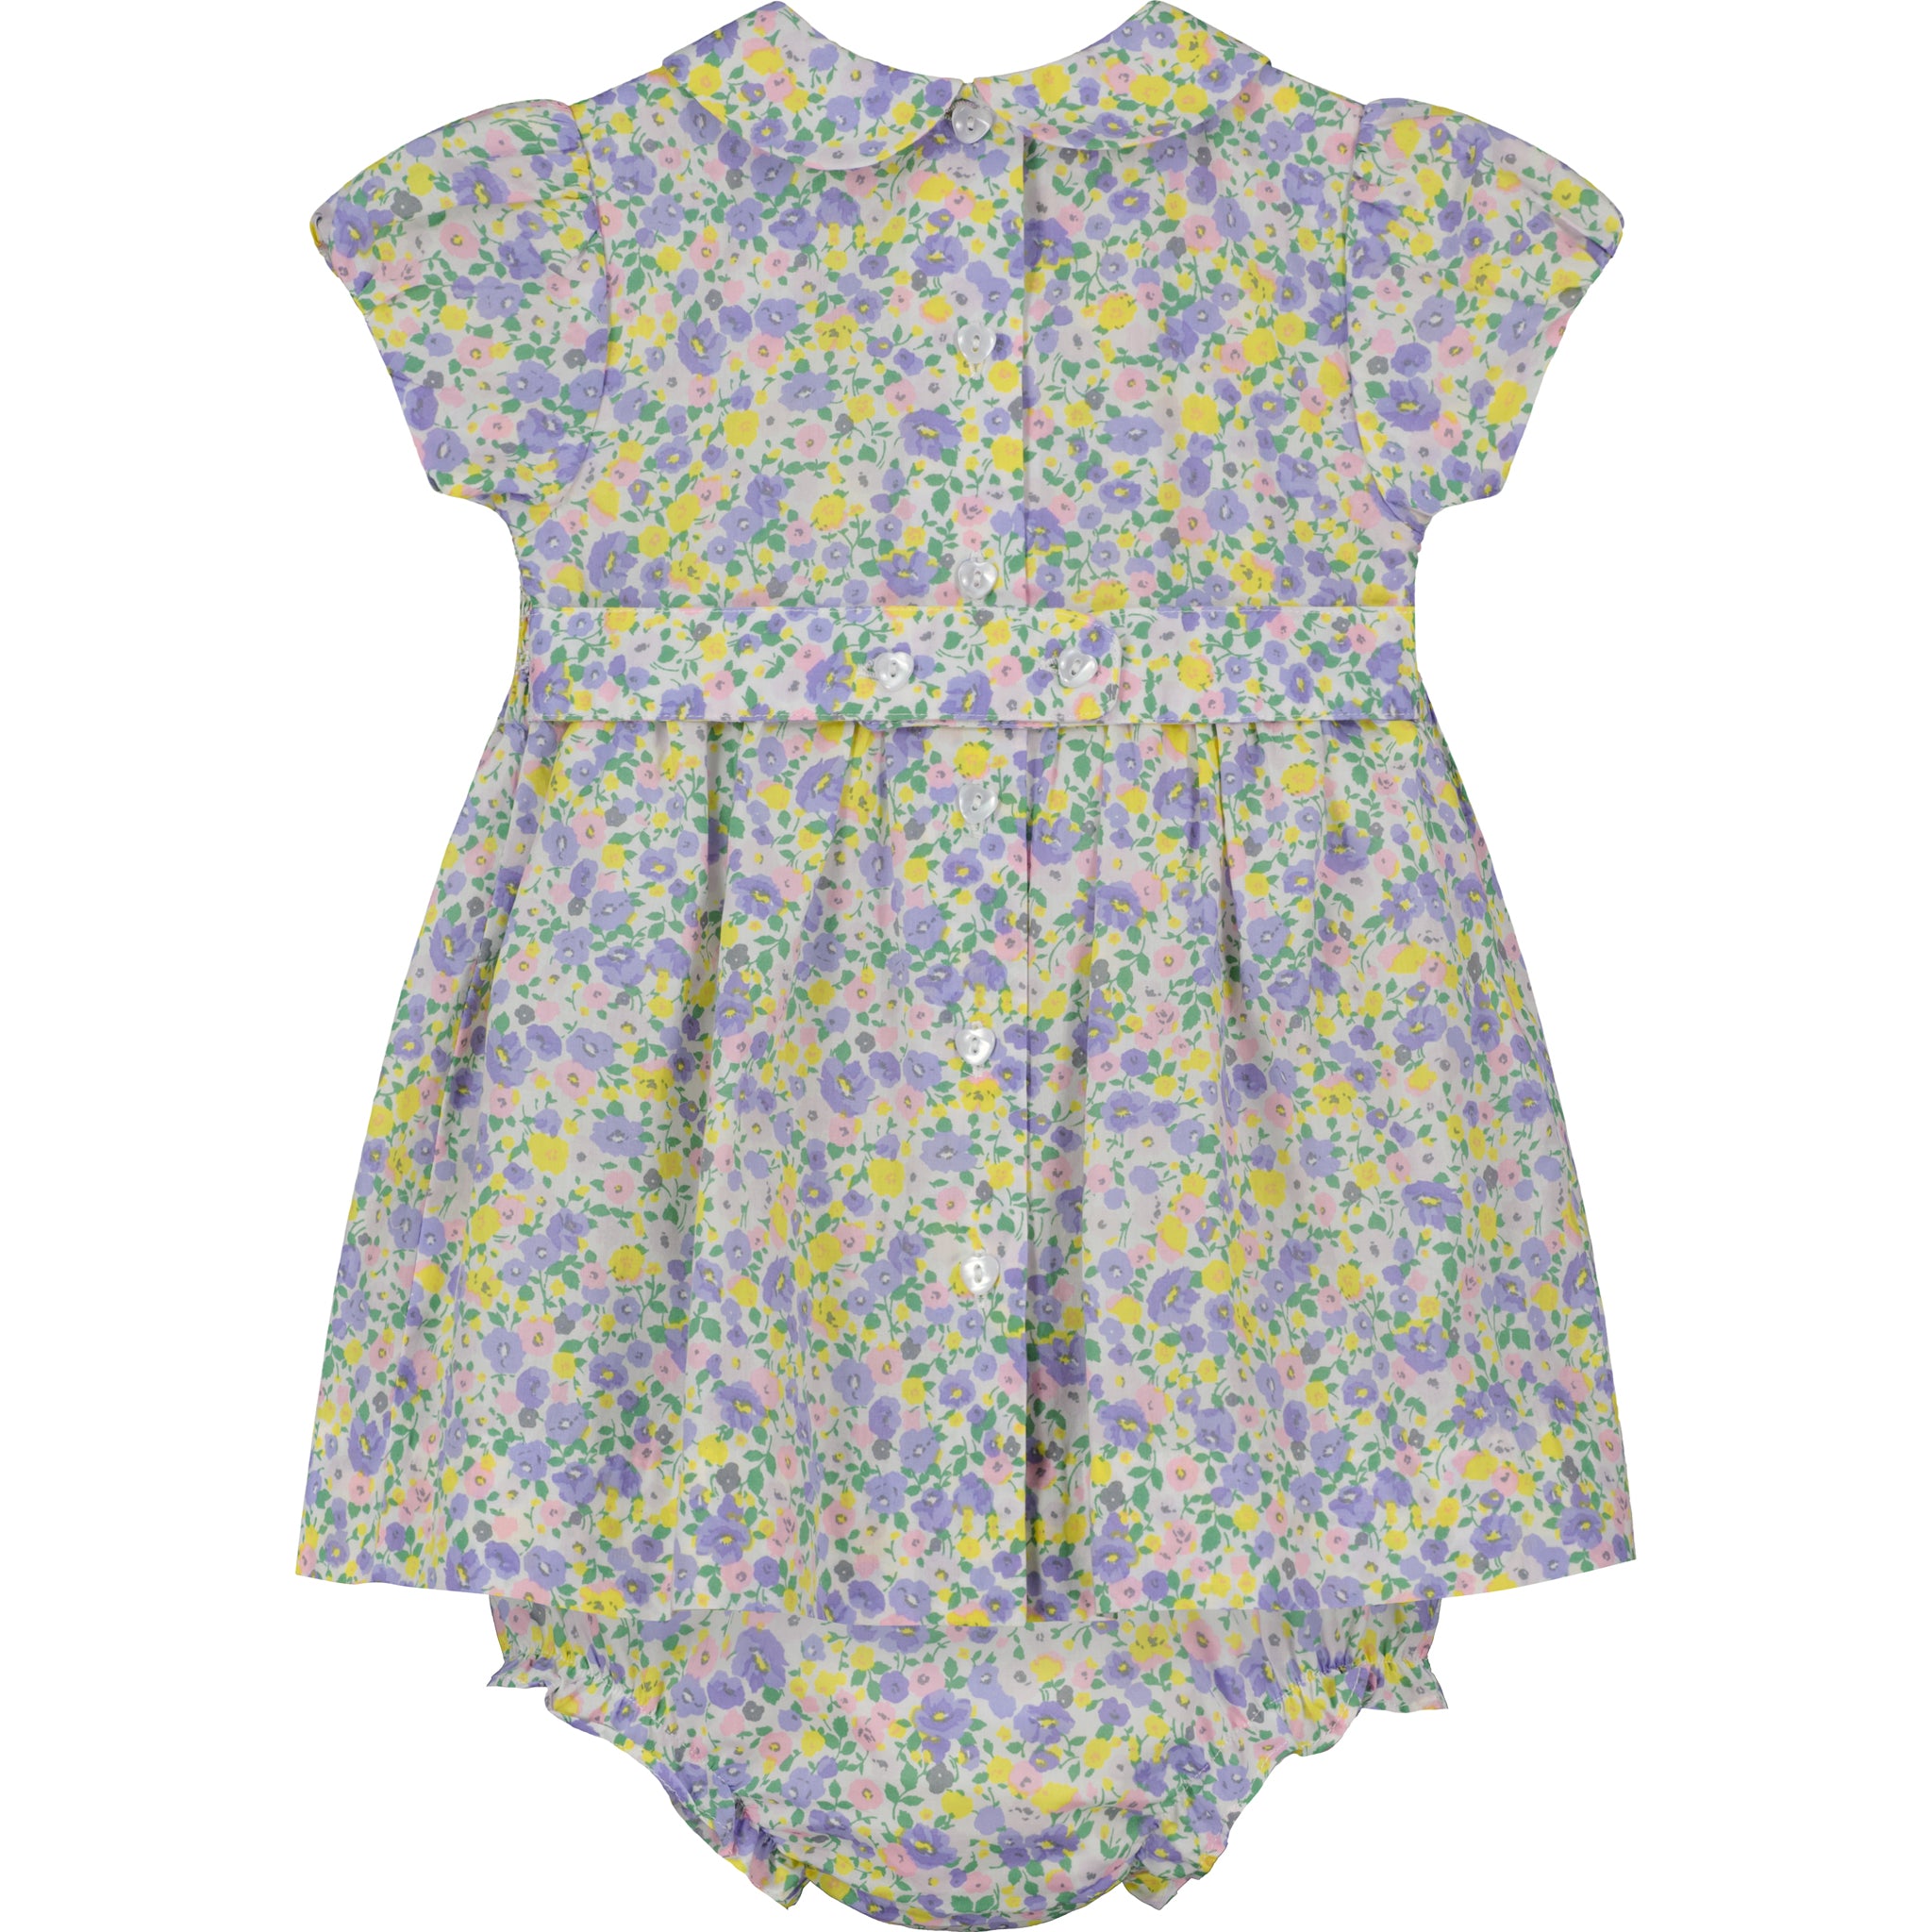 purple and yellow floral baby smocked dress, back